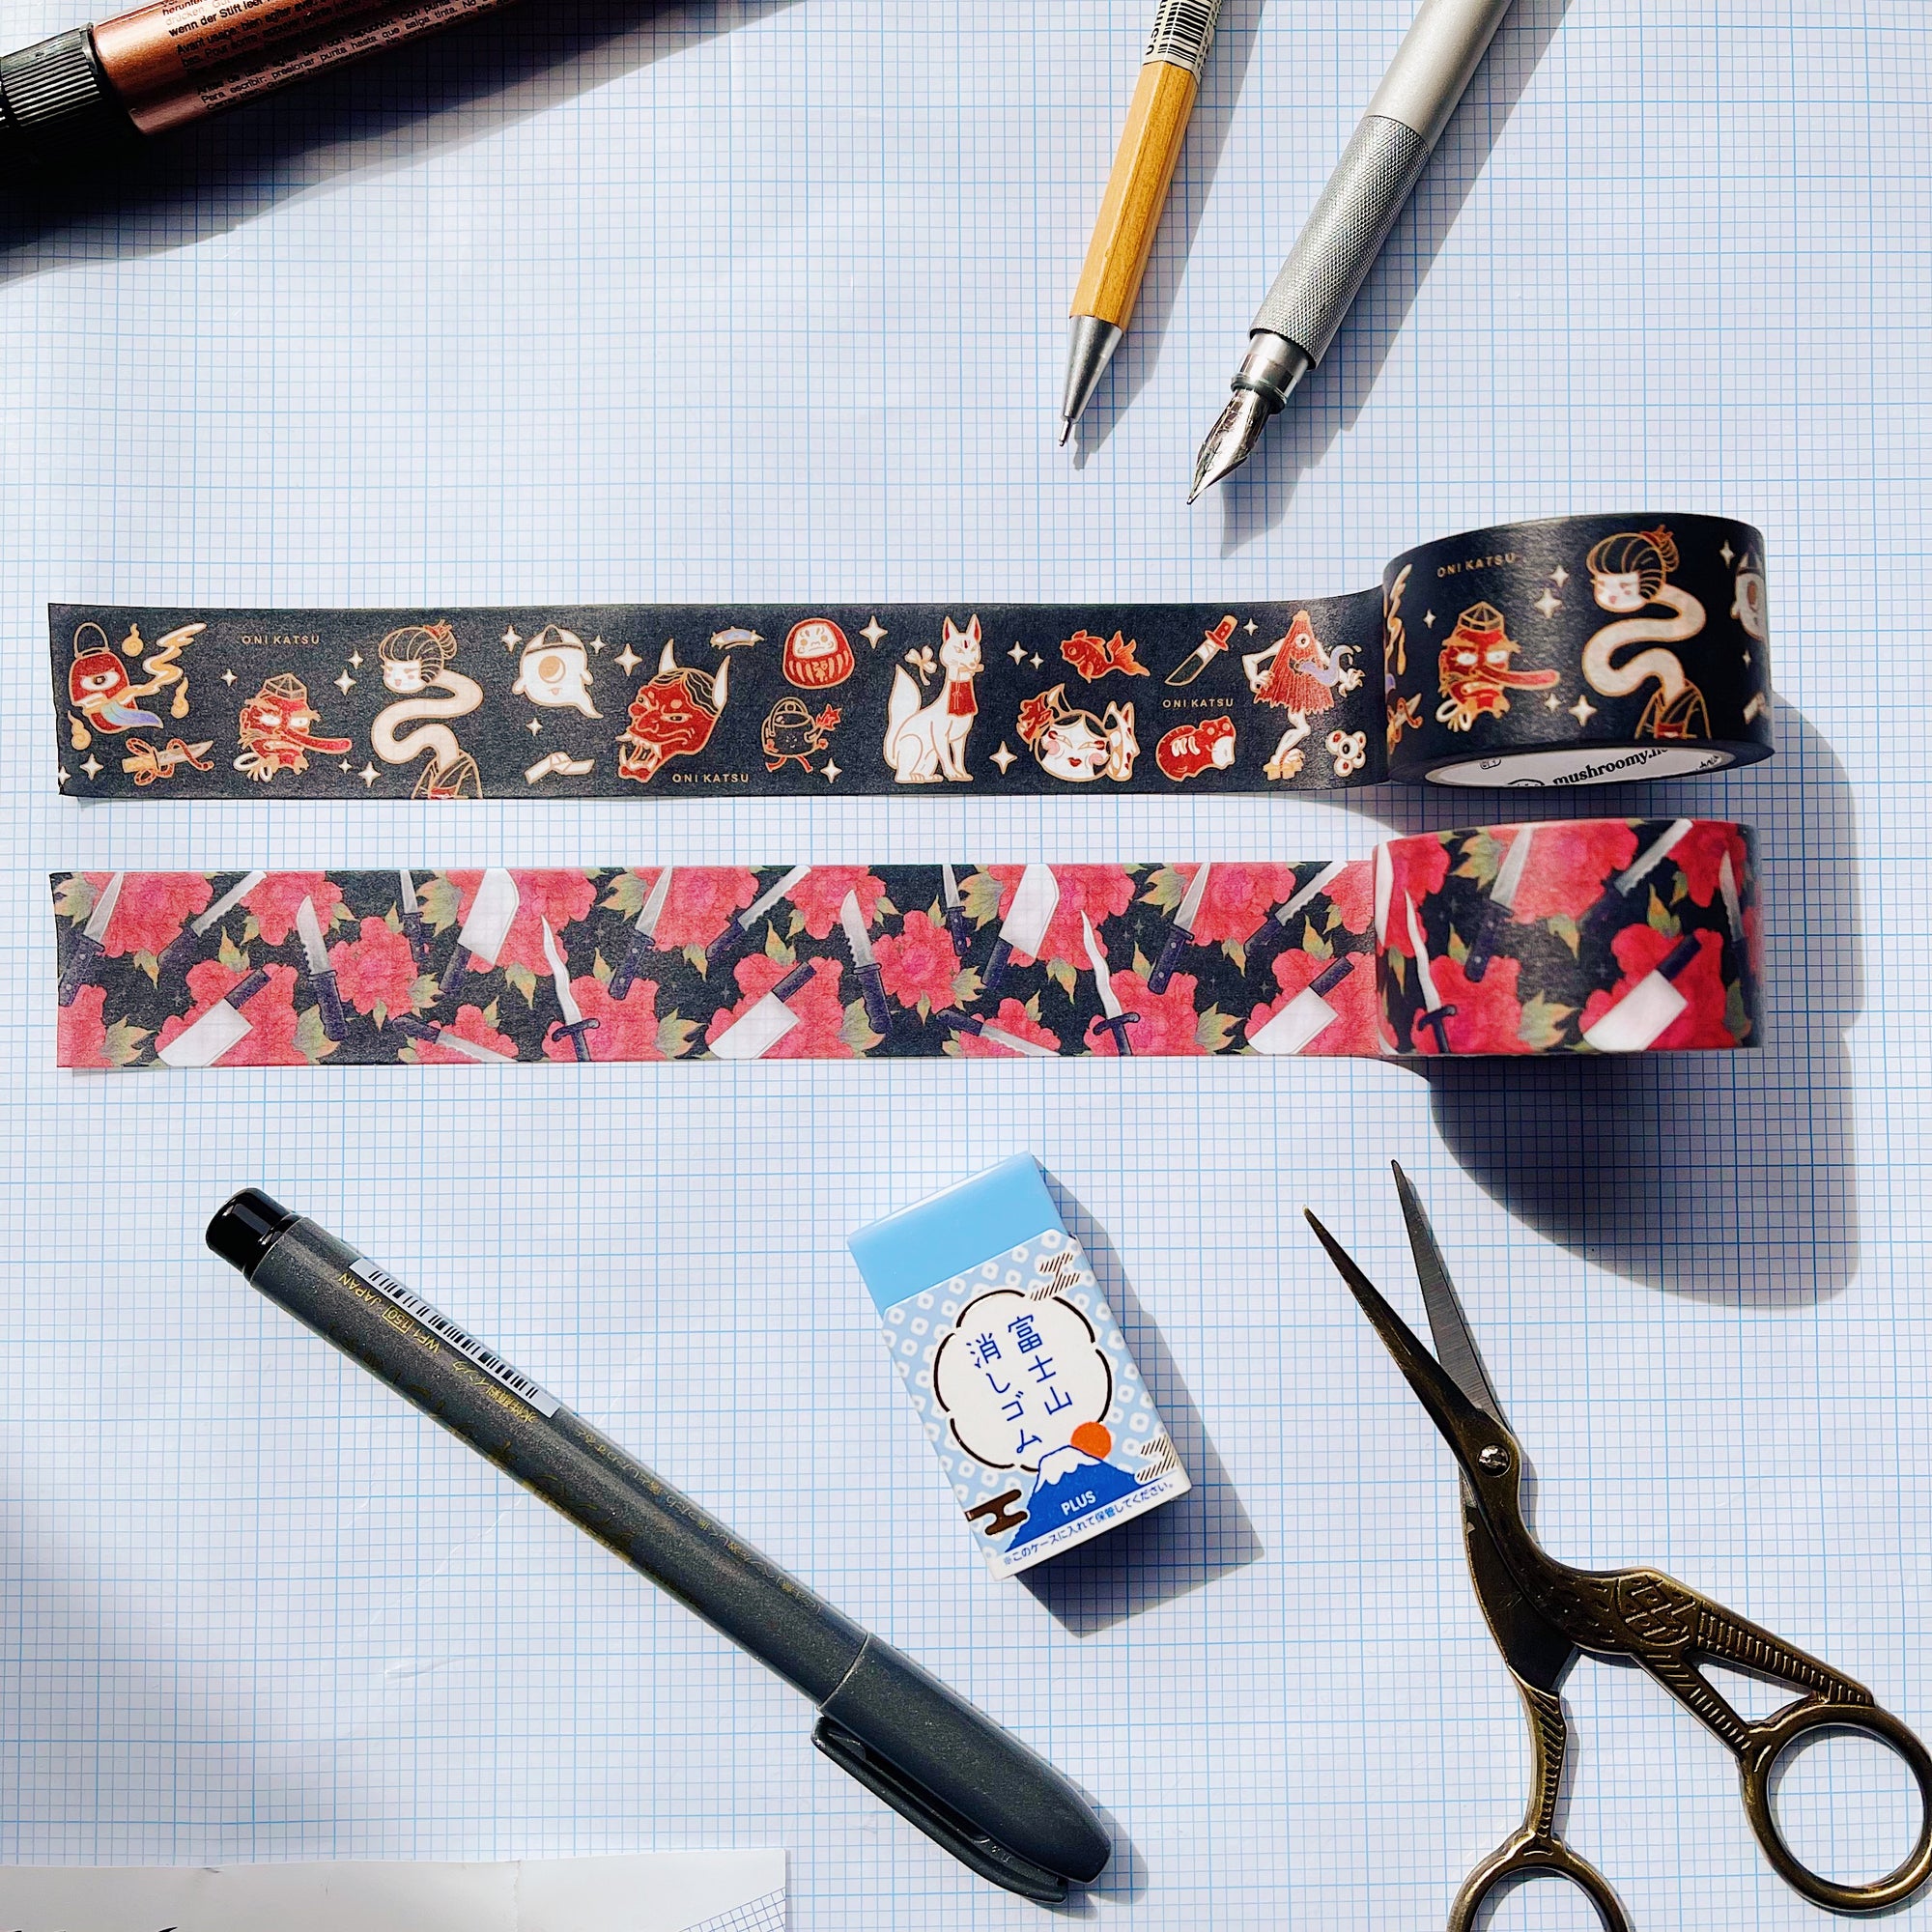 Knives and Flowers Washi Tape